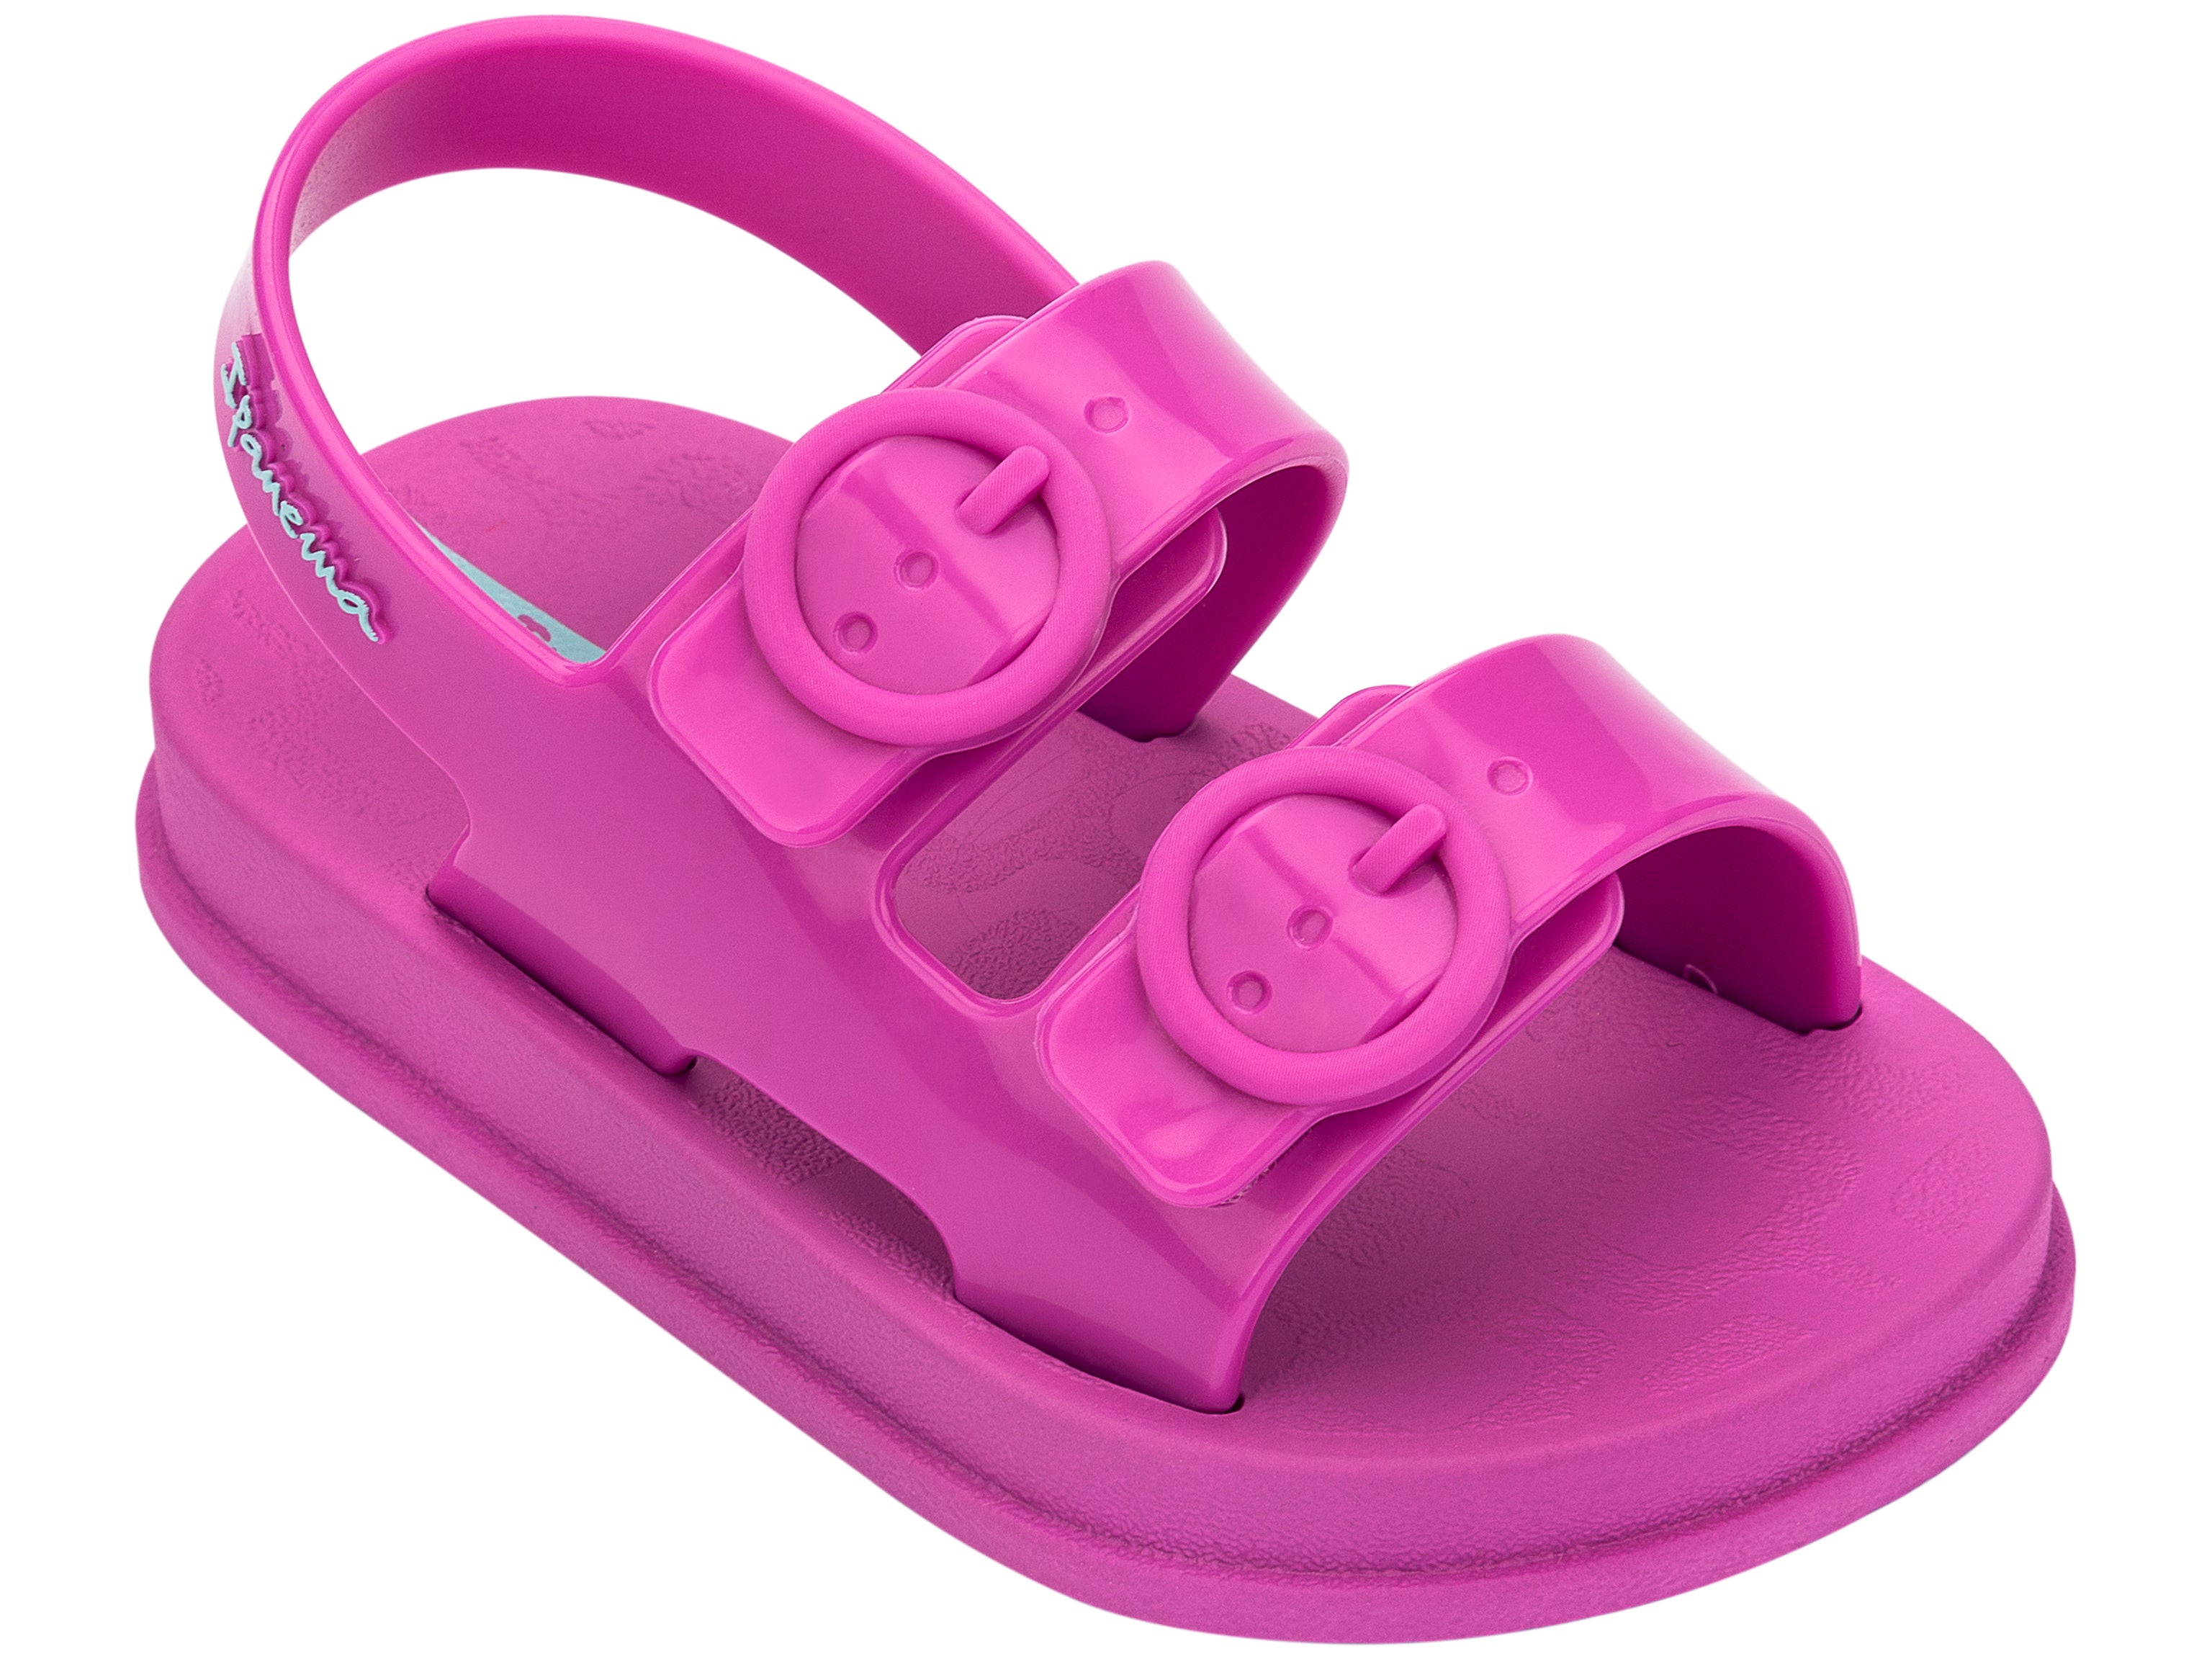 Angled view of a pink Ipanema Follow baby sandal with two decorative buckles on the upper.